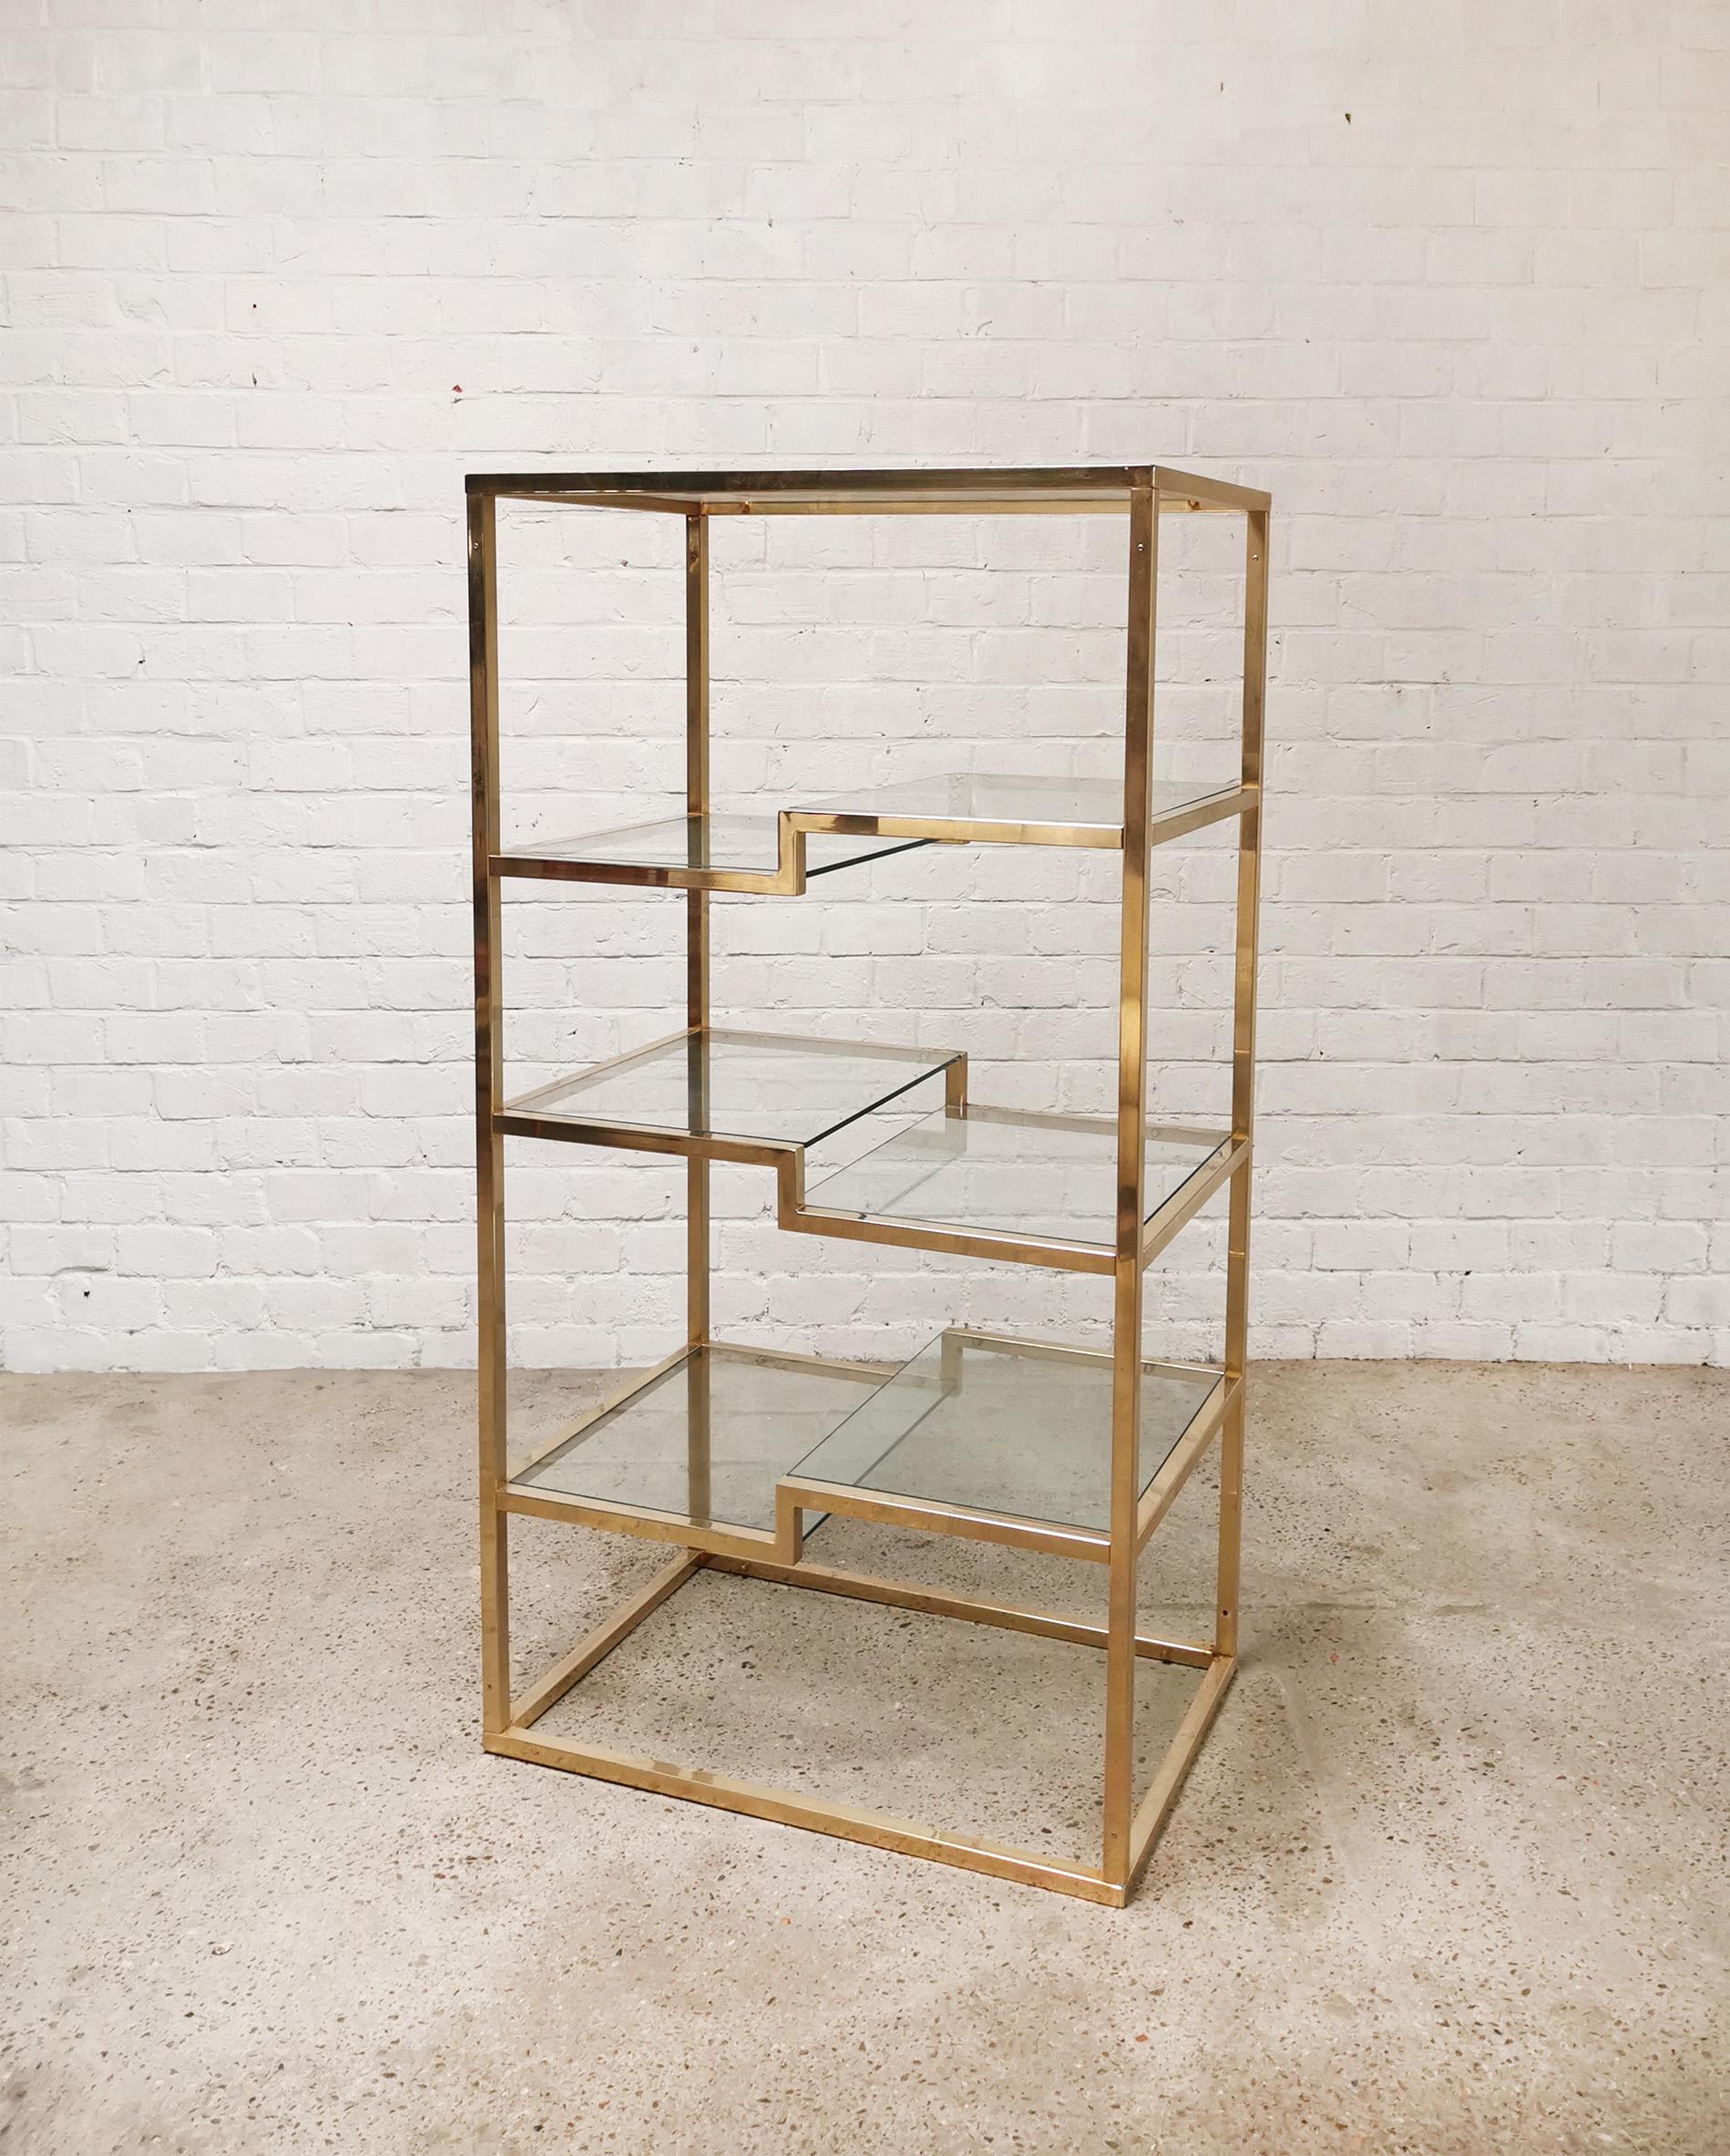 Gold plated geometric etagère by Belgo Chrom, produced in the 1970’s. This console is also often attributed to Romeo Rega. It features beautiful unique geometric shelves with thick clear glass panels. Makes a stunning wall display for your plants,